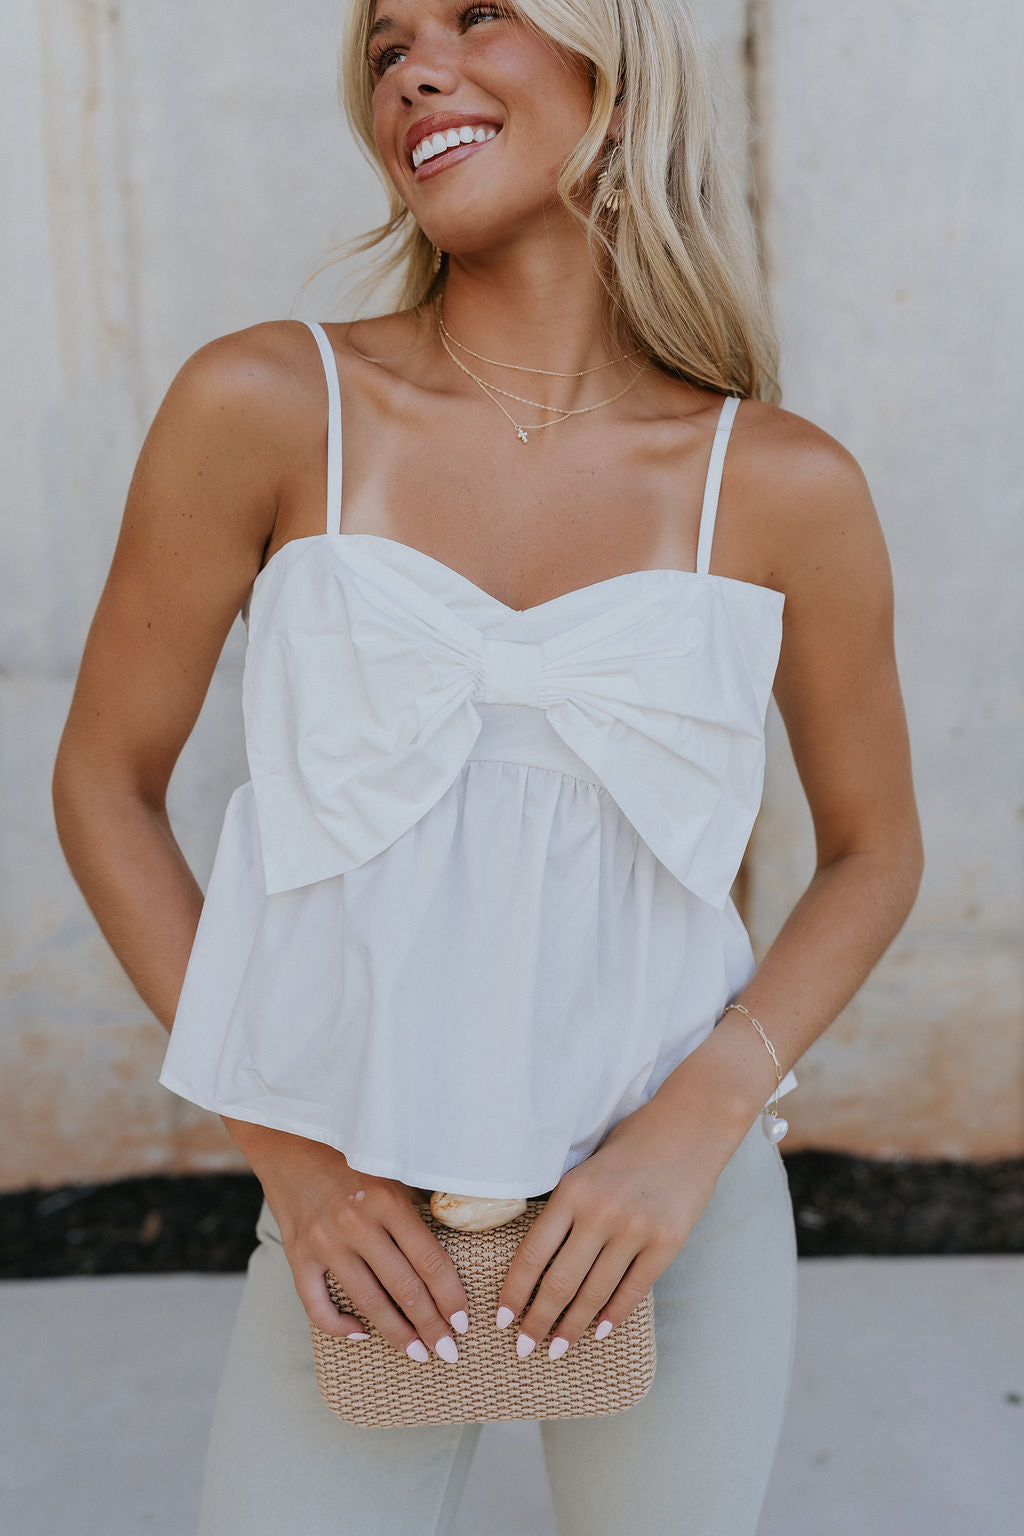 Close up view of female model wearing the Alina Off White Bow Poplin Tank which features White Lightweight Fabric, Cropped Waist, Front Oversized Bow Detail, Adjustable Straps and Monochrome Back Zipper with Hook Closure